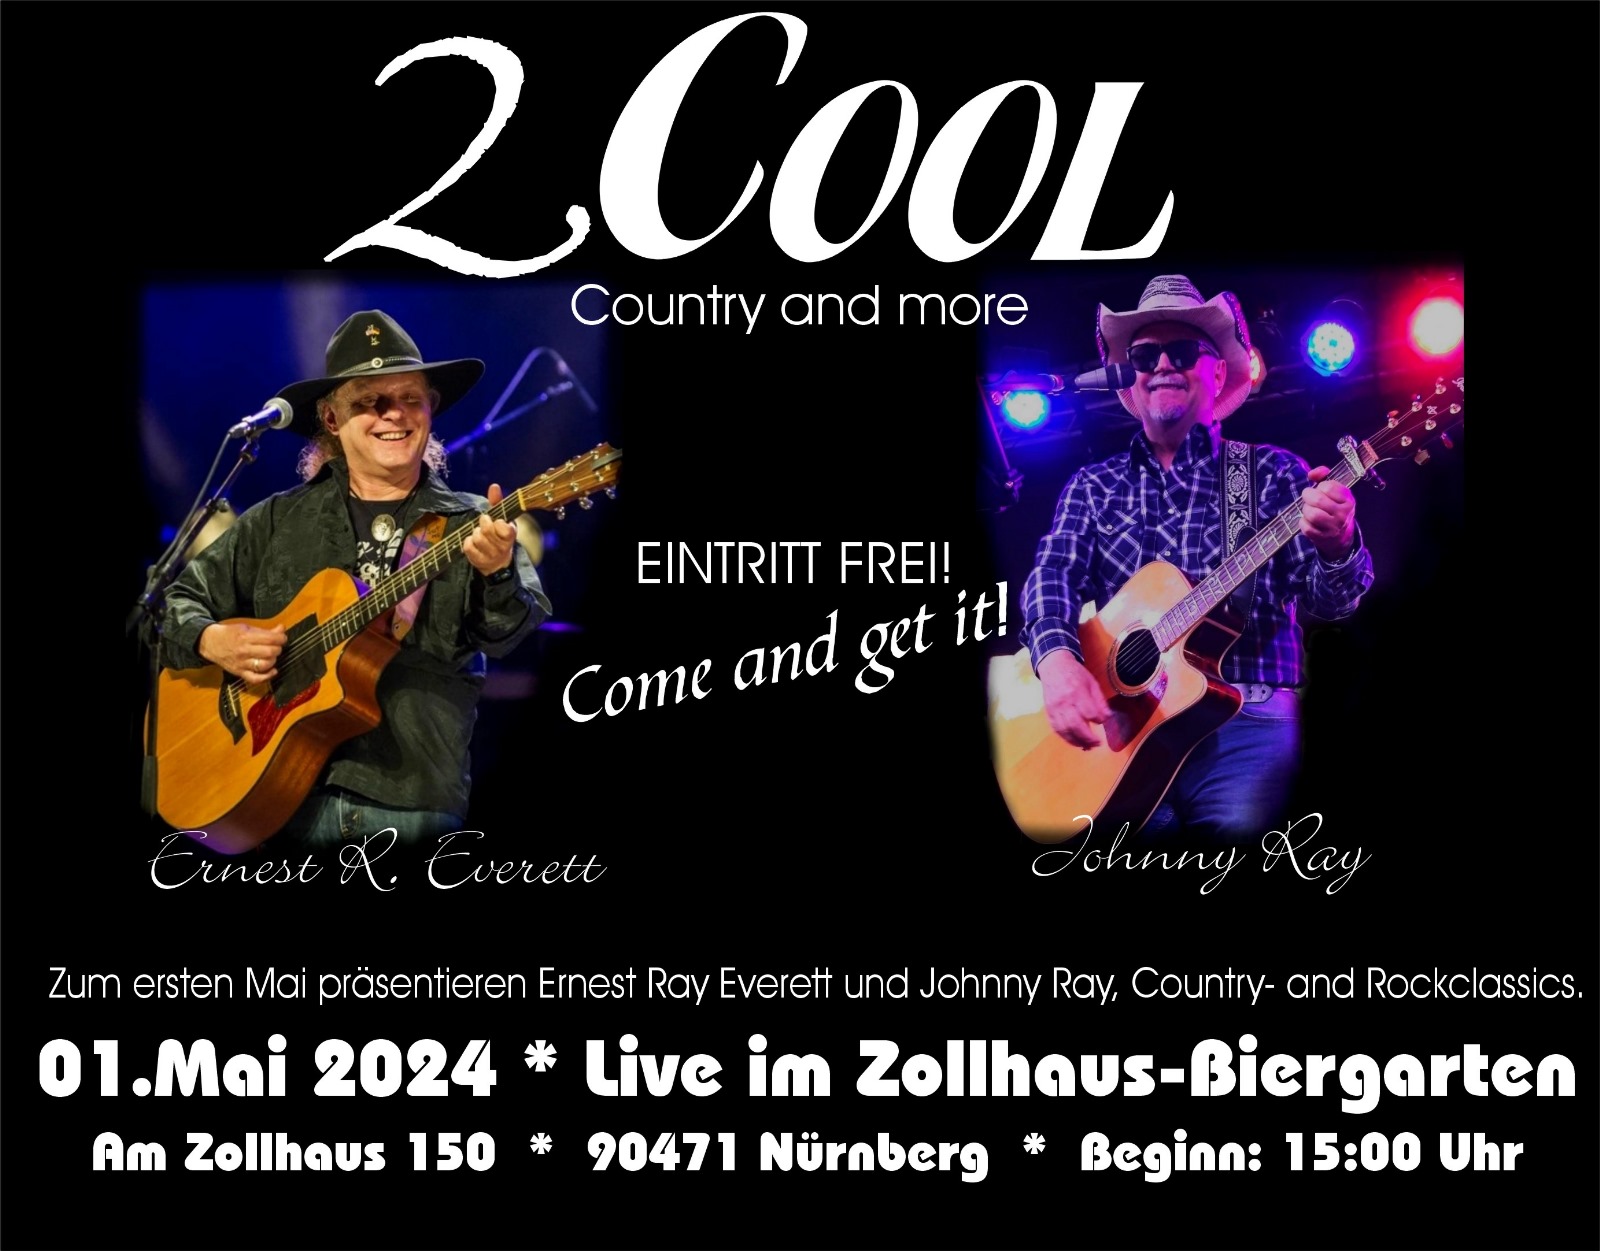 2 Cool Country & More (Ernest R. Everett & Johnny Ray )